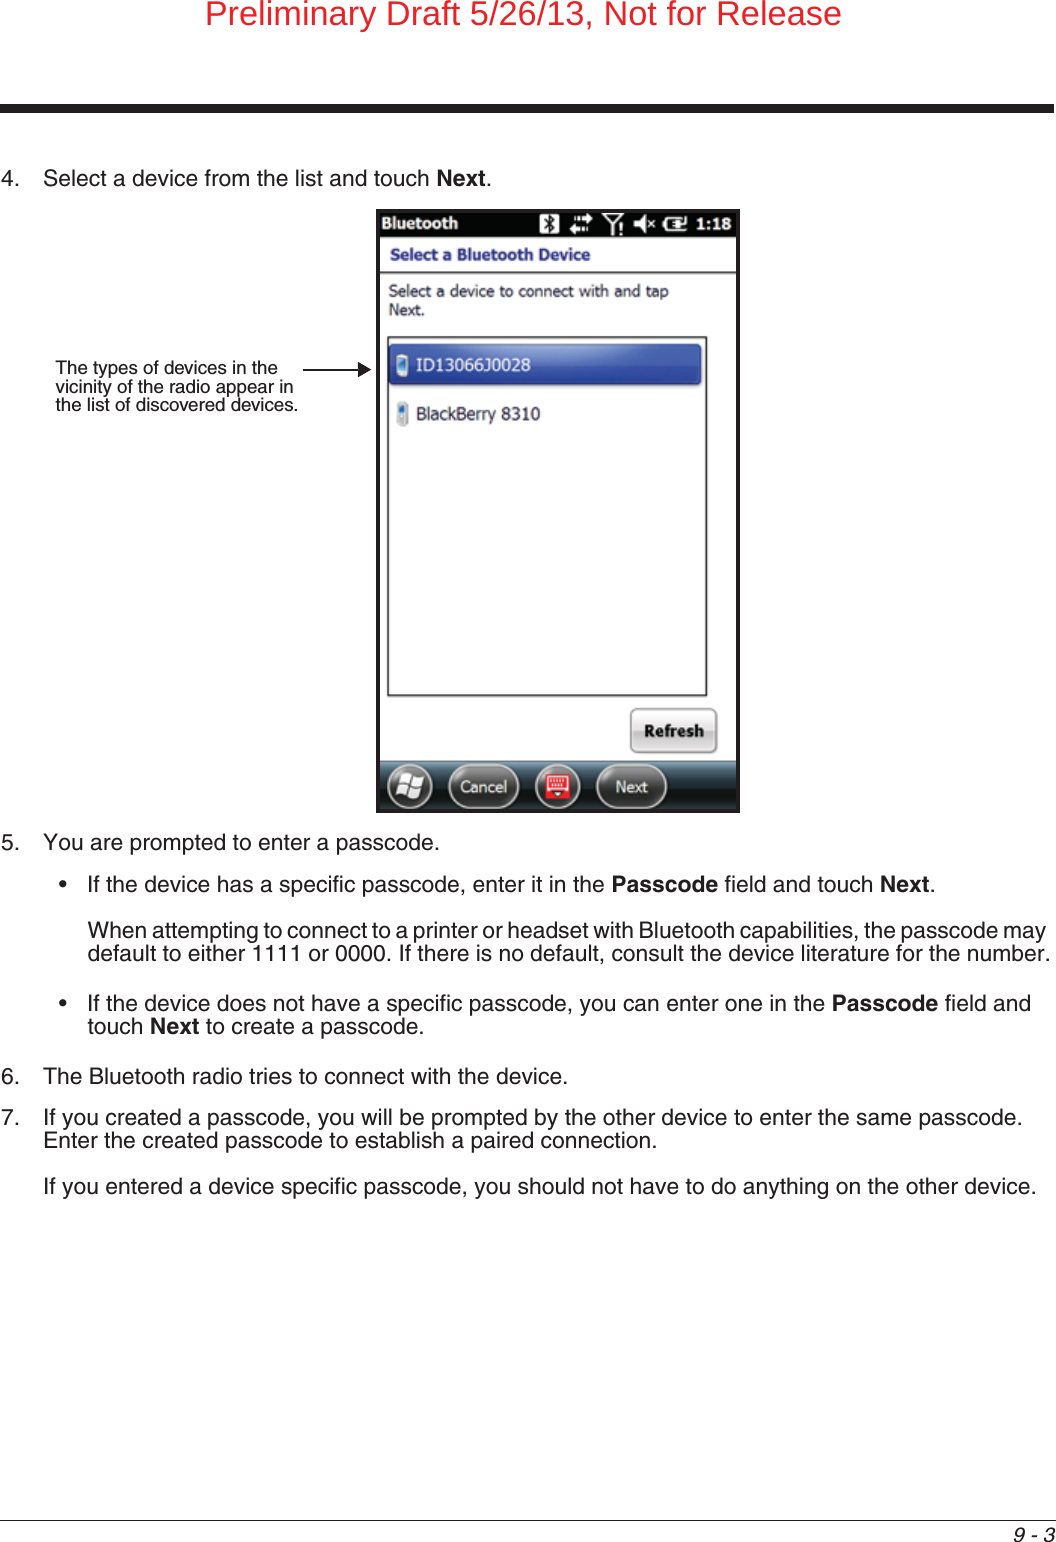 9 - 34. Select a device from the list and touch Next. 5. You are prompted to enter a passcode.• If the device has a specific passcode, enter it in the Passcode field and touch Next.When attempting to connect to a printer or headset with Bluetooth capabilities, the passcode may default to either 1111 or 0000. If there is no default, consult the device literature for the number.• If the device does not have a specific passcode, you can enter one in the Passcode field and touch Next to create a passcode.6. The Bluetooth radio tries to connect with the device.7. If you created a passcode, you will be prompted by the other device to enter the same passcode. Enter the created passcode to establish a paired connection. If you entered a device specific passcode, you should not have to do anything on the other device. The types of devices in the vicinity of the radio appear in the list of discovered devices.Preliminary Draft 5/26/13, Not for Release